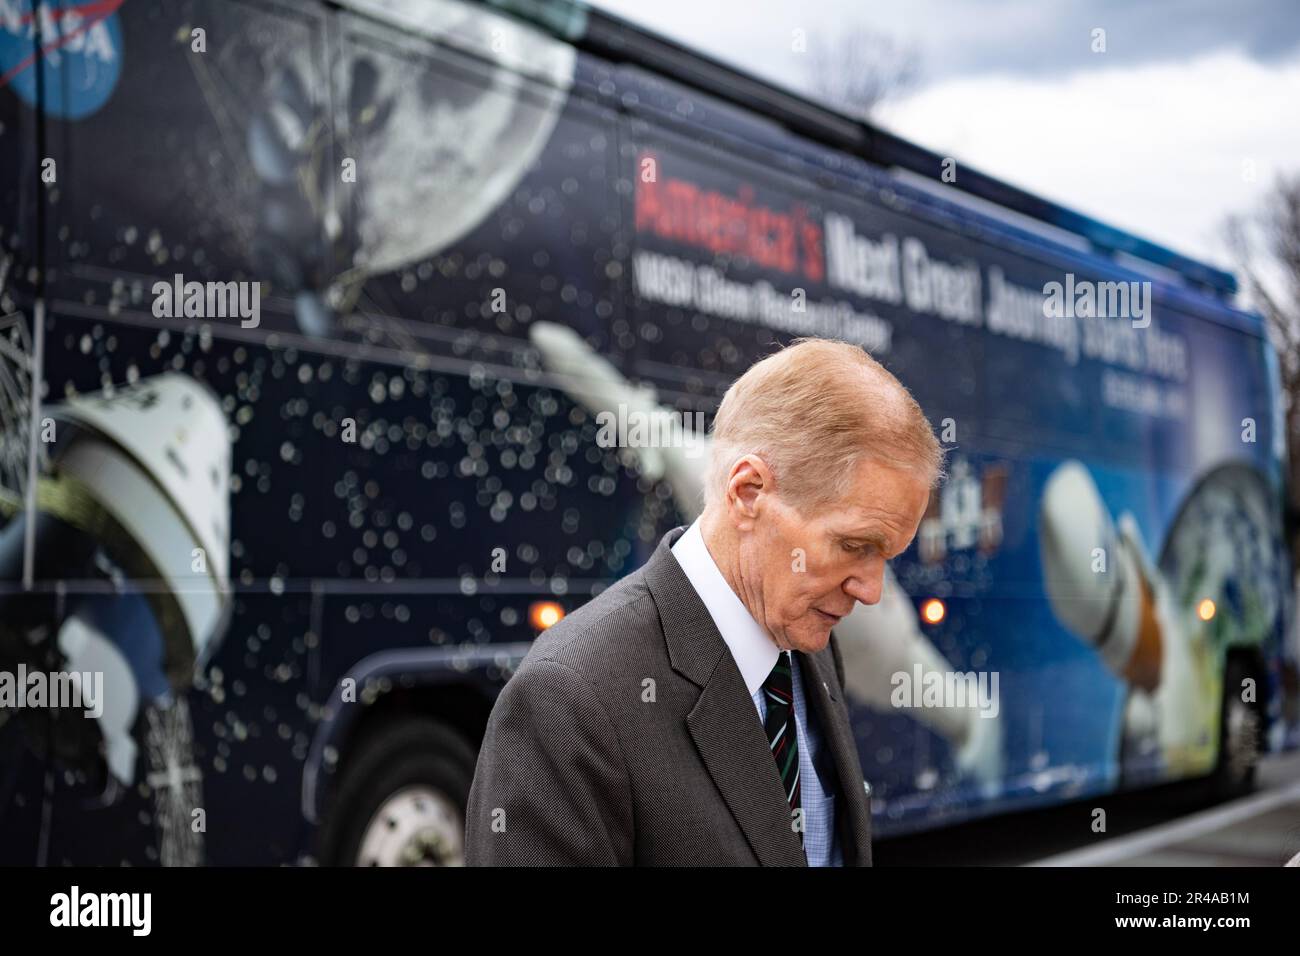 Bill Nelson, administrator, National Aeronautics and Space Administration (NASA), arrives at Arlington National Cemetery, Arlington, Va., Jan. 26, 2023. Nelson was at ANC for the NASA Day of Remembrance, where several wreaths are laid at memorials and gravesites in memory of those men and women who lost their lives furthering the cause of exploration and discovery. Stock Photo